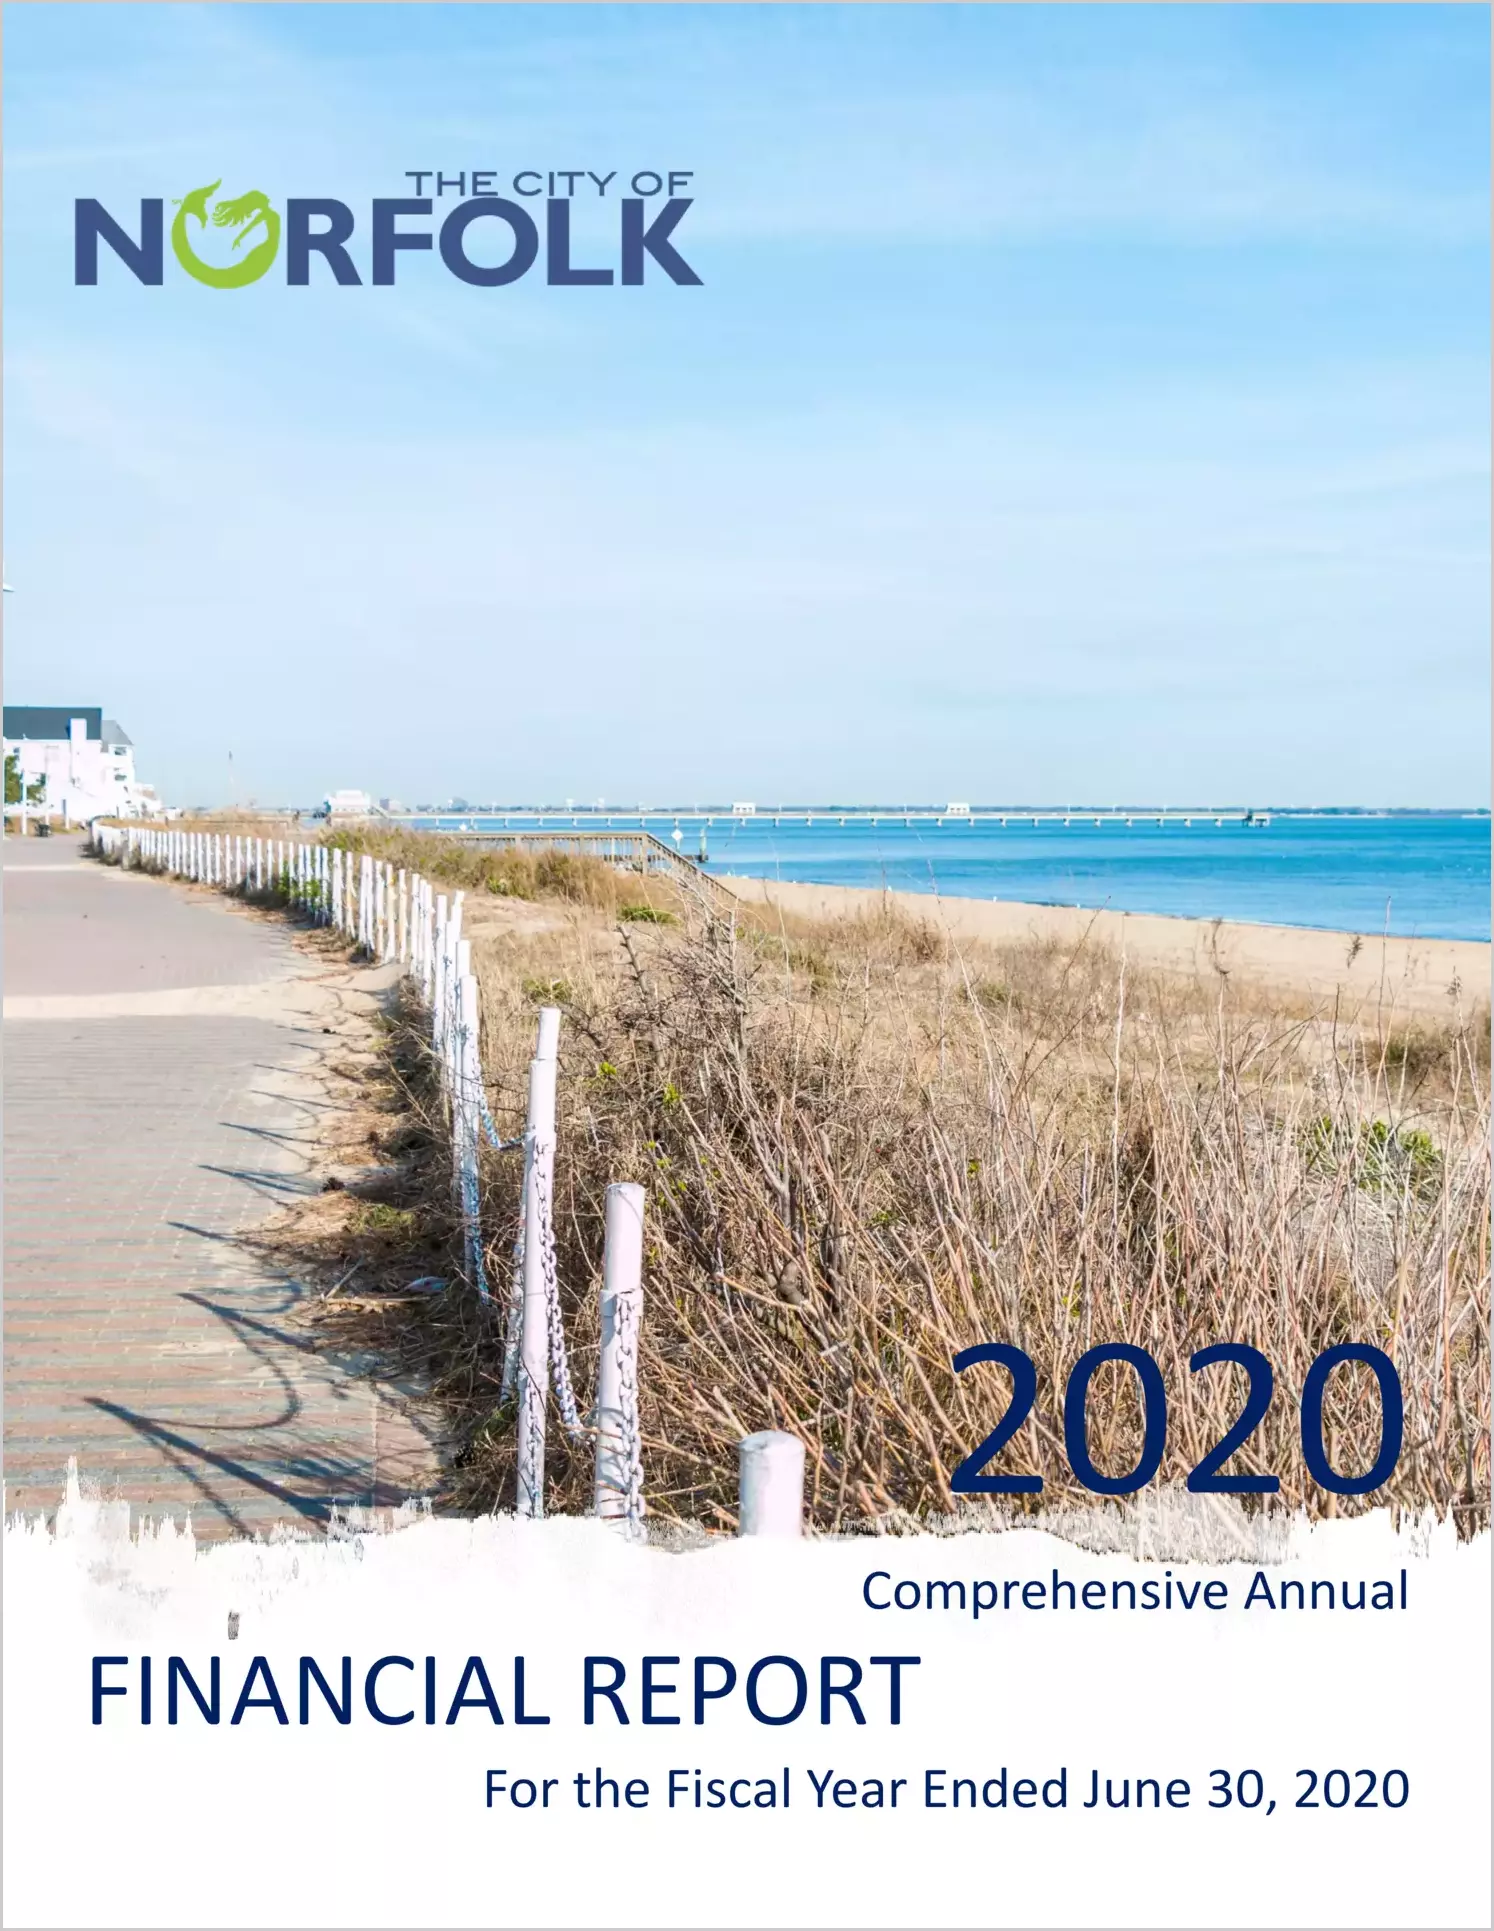 2020 Annual Financial Report for City of Norfolk